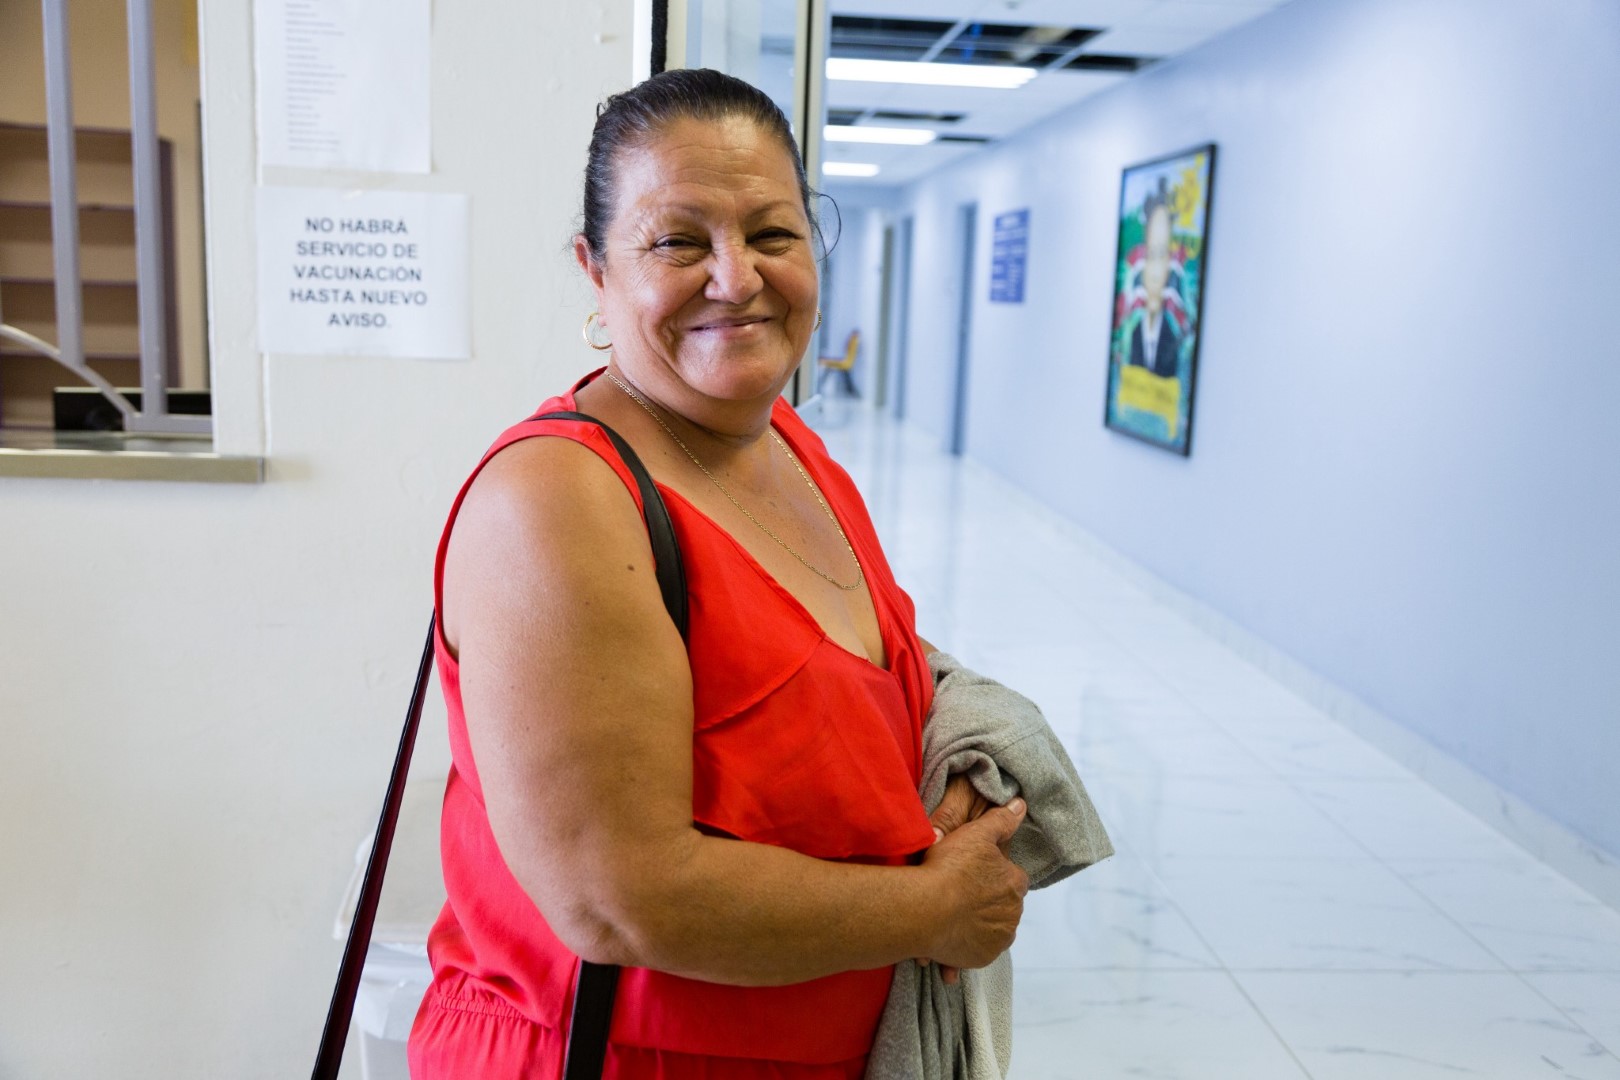 In Puerto Rico after Hurricane Maria, diabetics had a tough time keeping their insulin at the proper cool temperature because the storm knocked out power for months. In rural Jayuya, Americares supported health centers with fresh shipments of insulin and other cold-chain medicine.